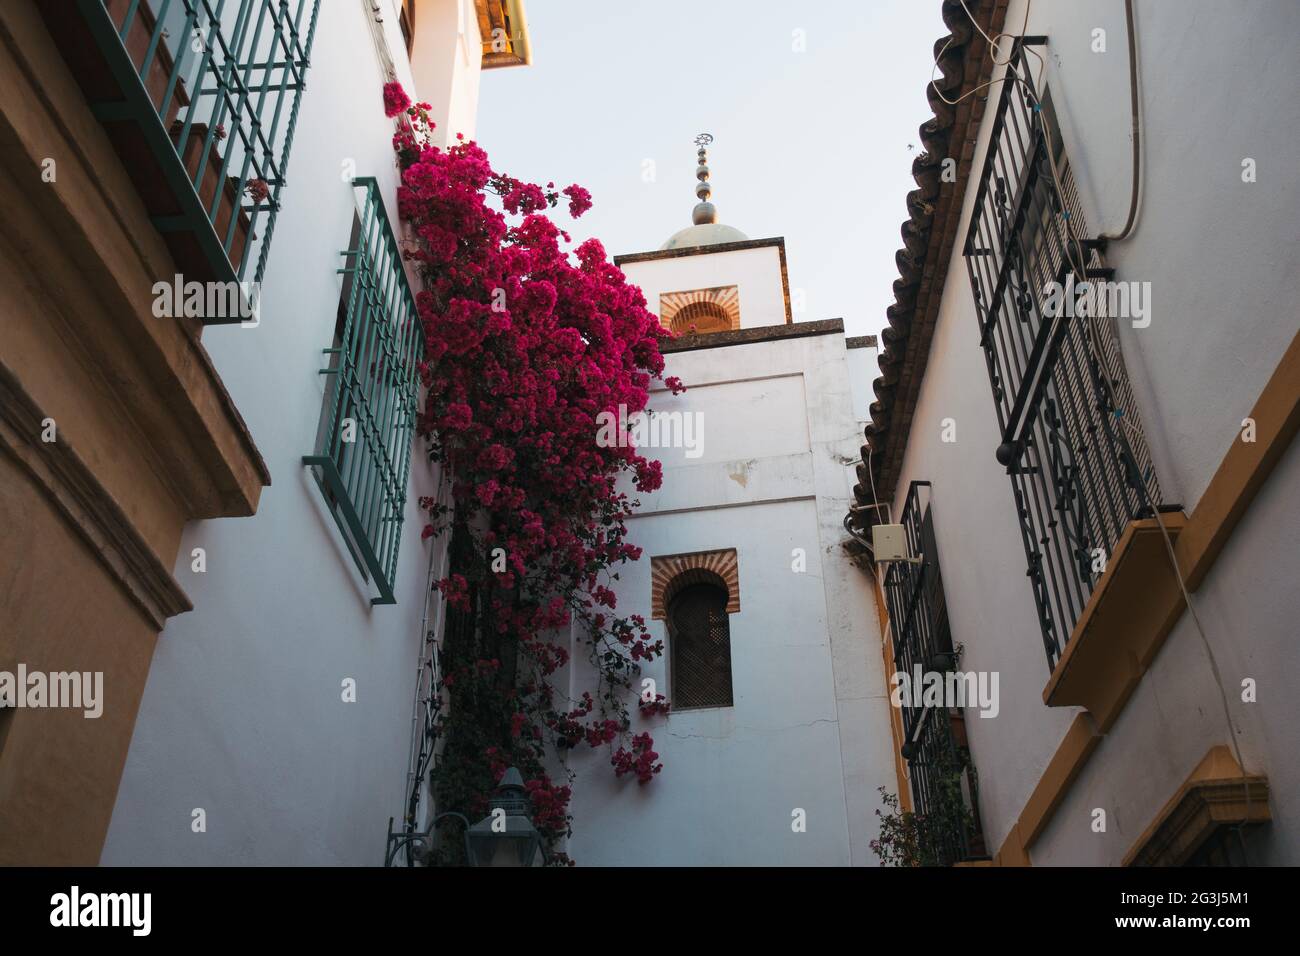 Bright pink bougainvillea flowers hang from a building in Córdoba, Spain Stock Photo